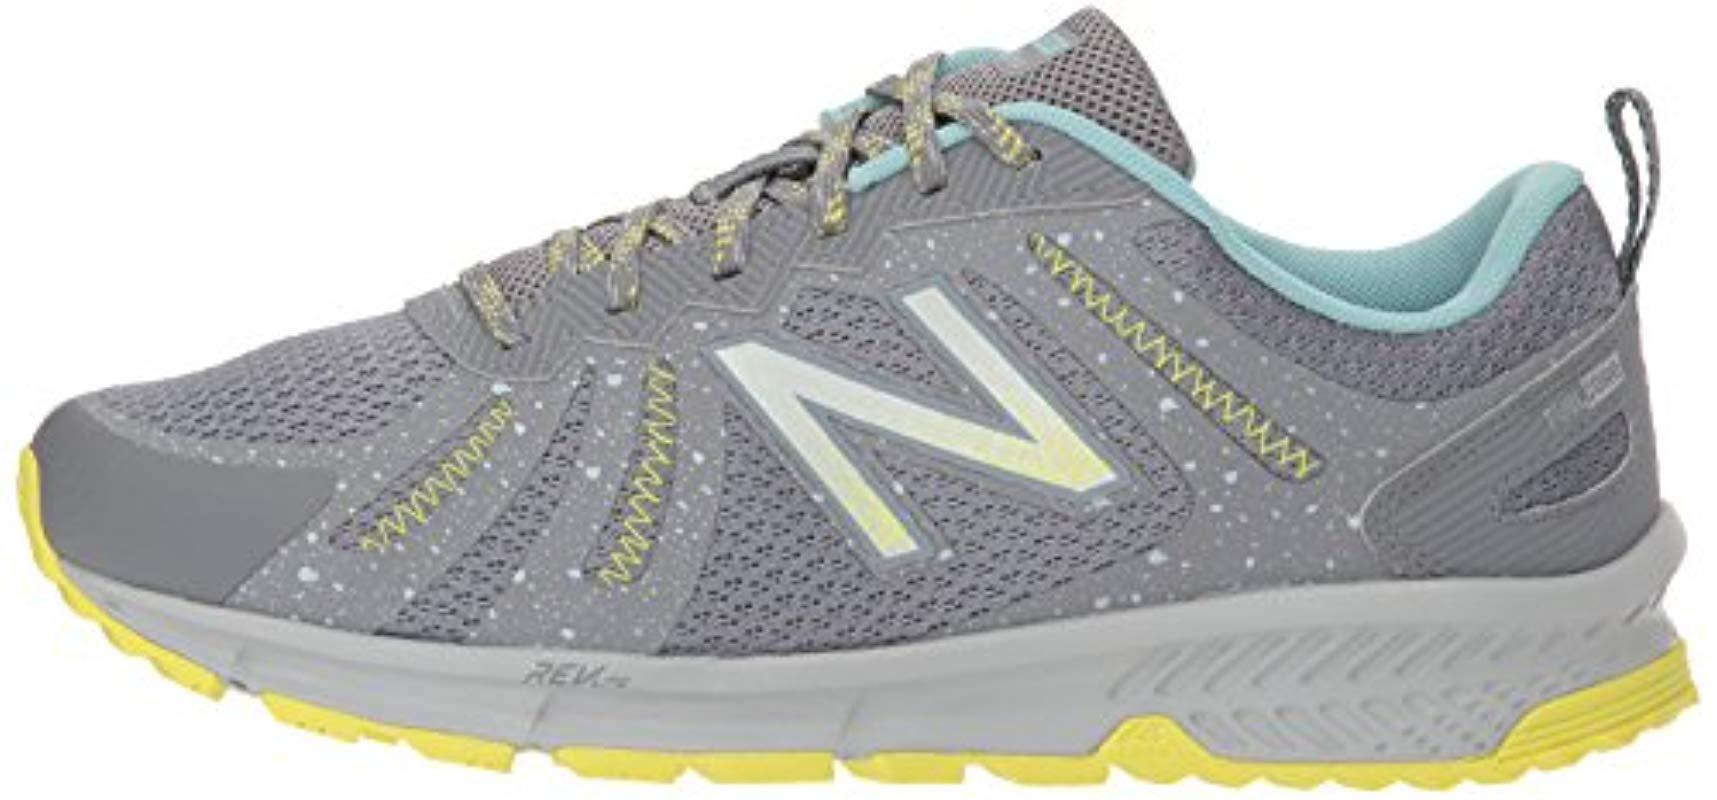 new balance women's 590v4 fuelcore trail running shoe for Sale,Up To OFF 71%